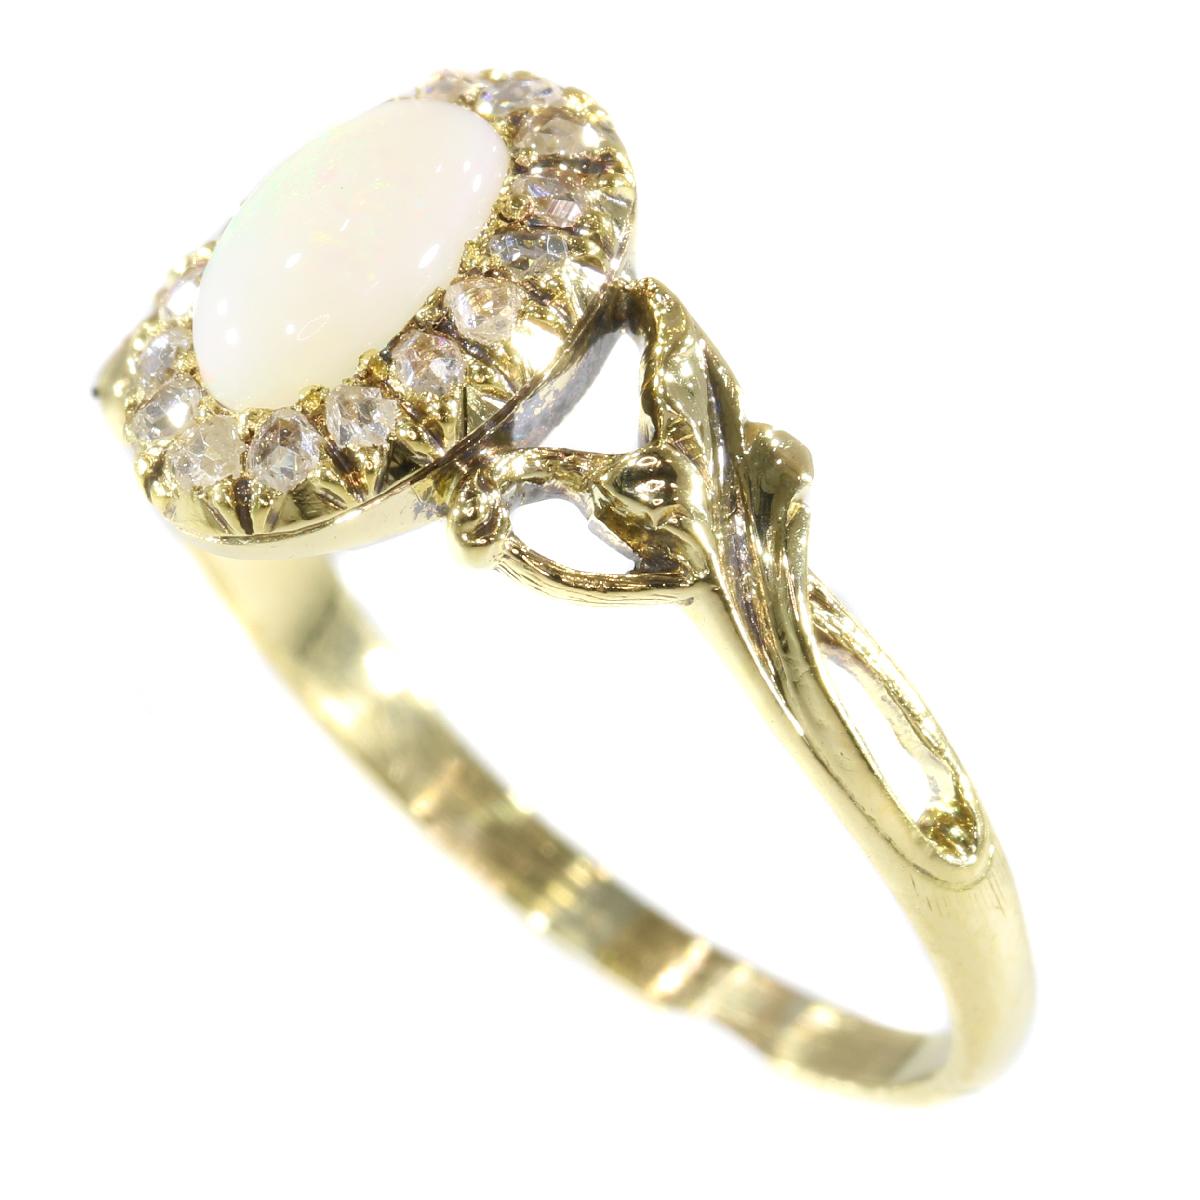 Women's French Antique Art Nouveau Gold Ring with Diamonds and Opal